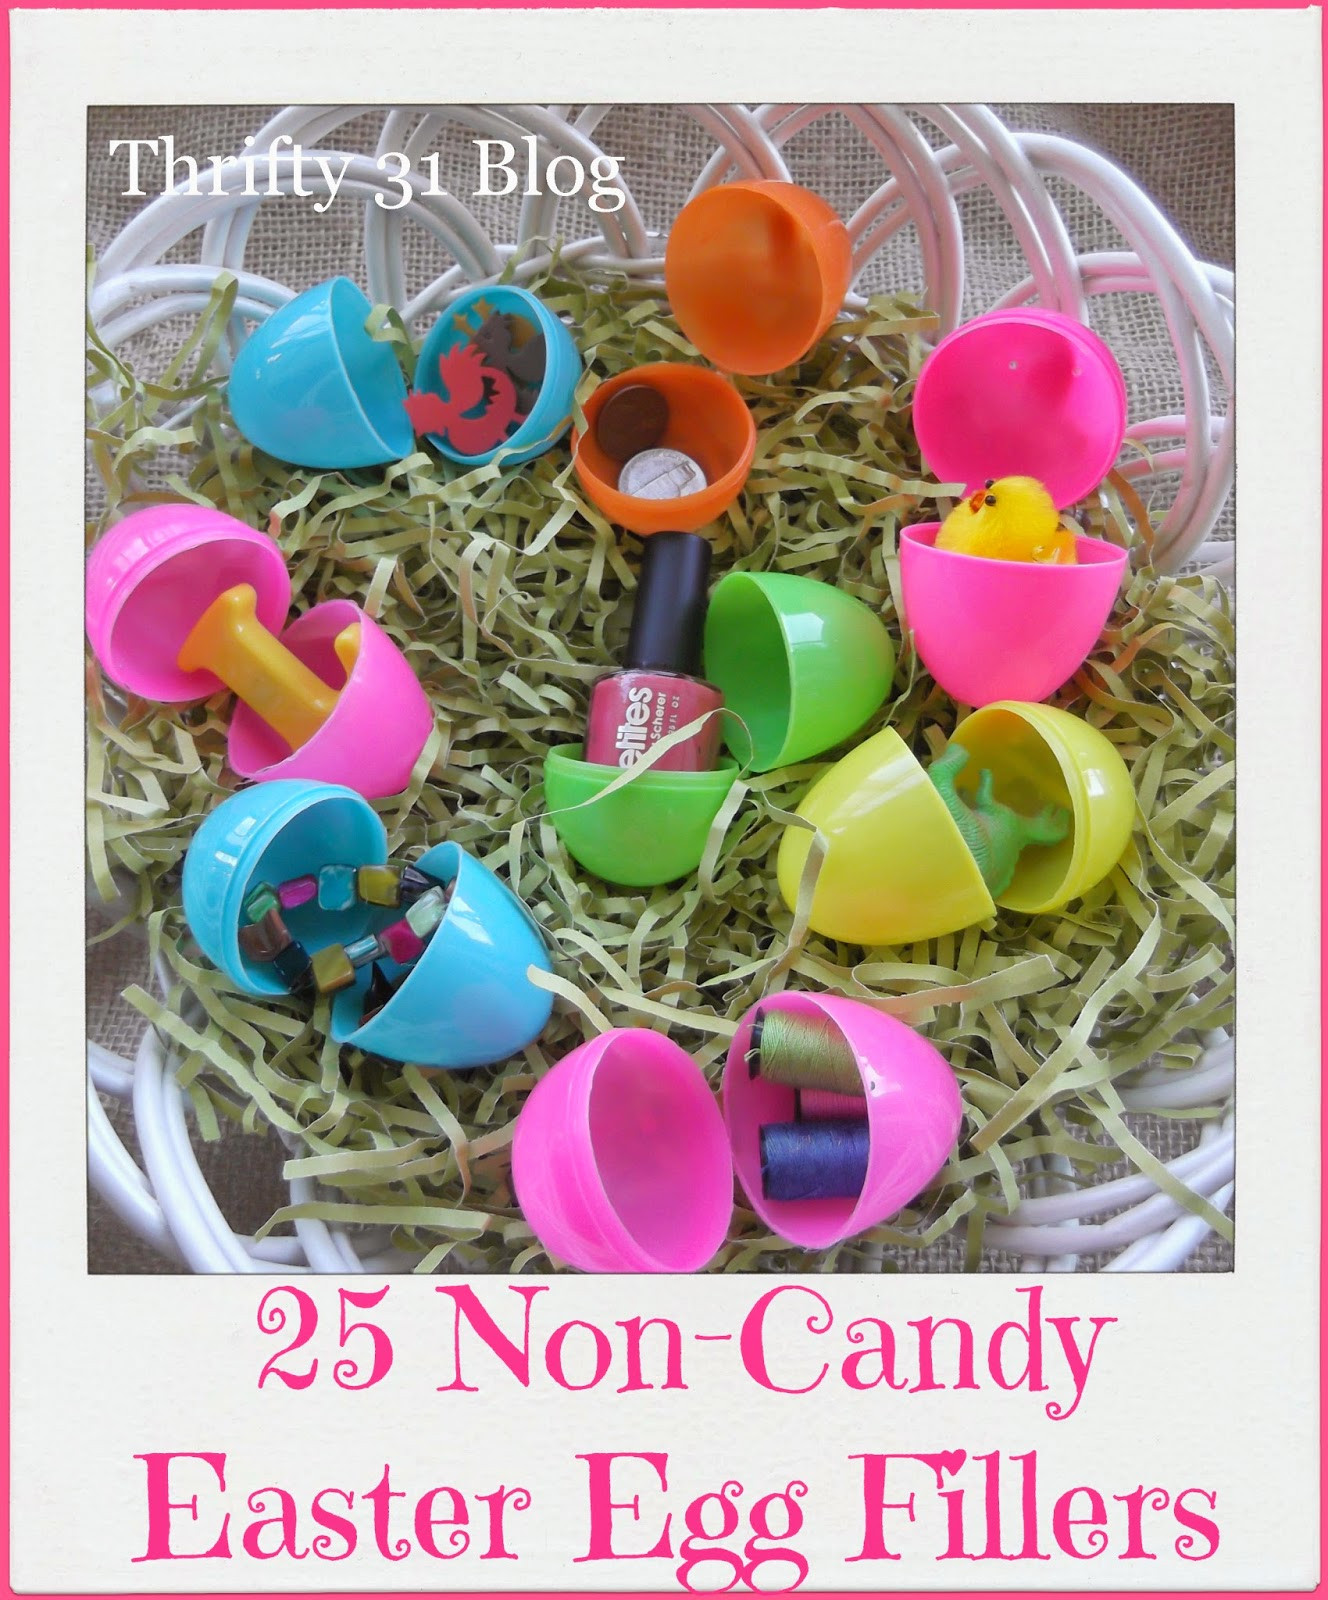 Ideas For Easter Egg Fillers
 Thrifty 31 Blog 25 Non Candy Easter Egg Fillers